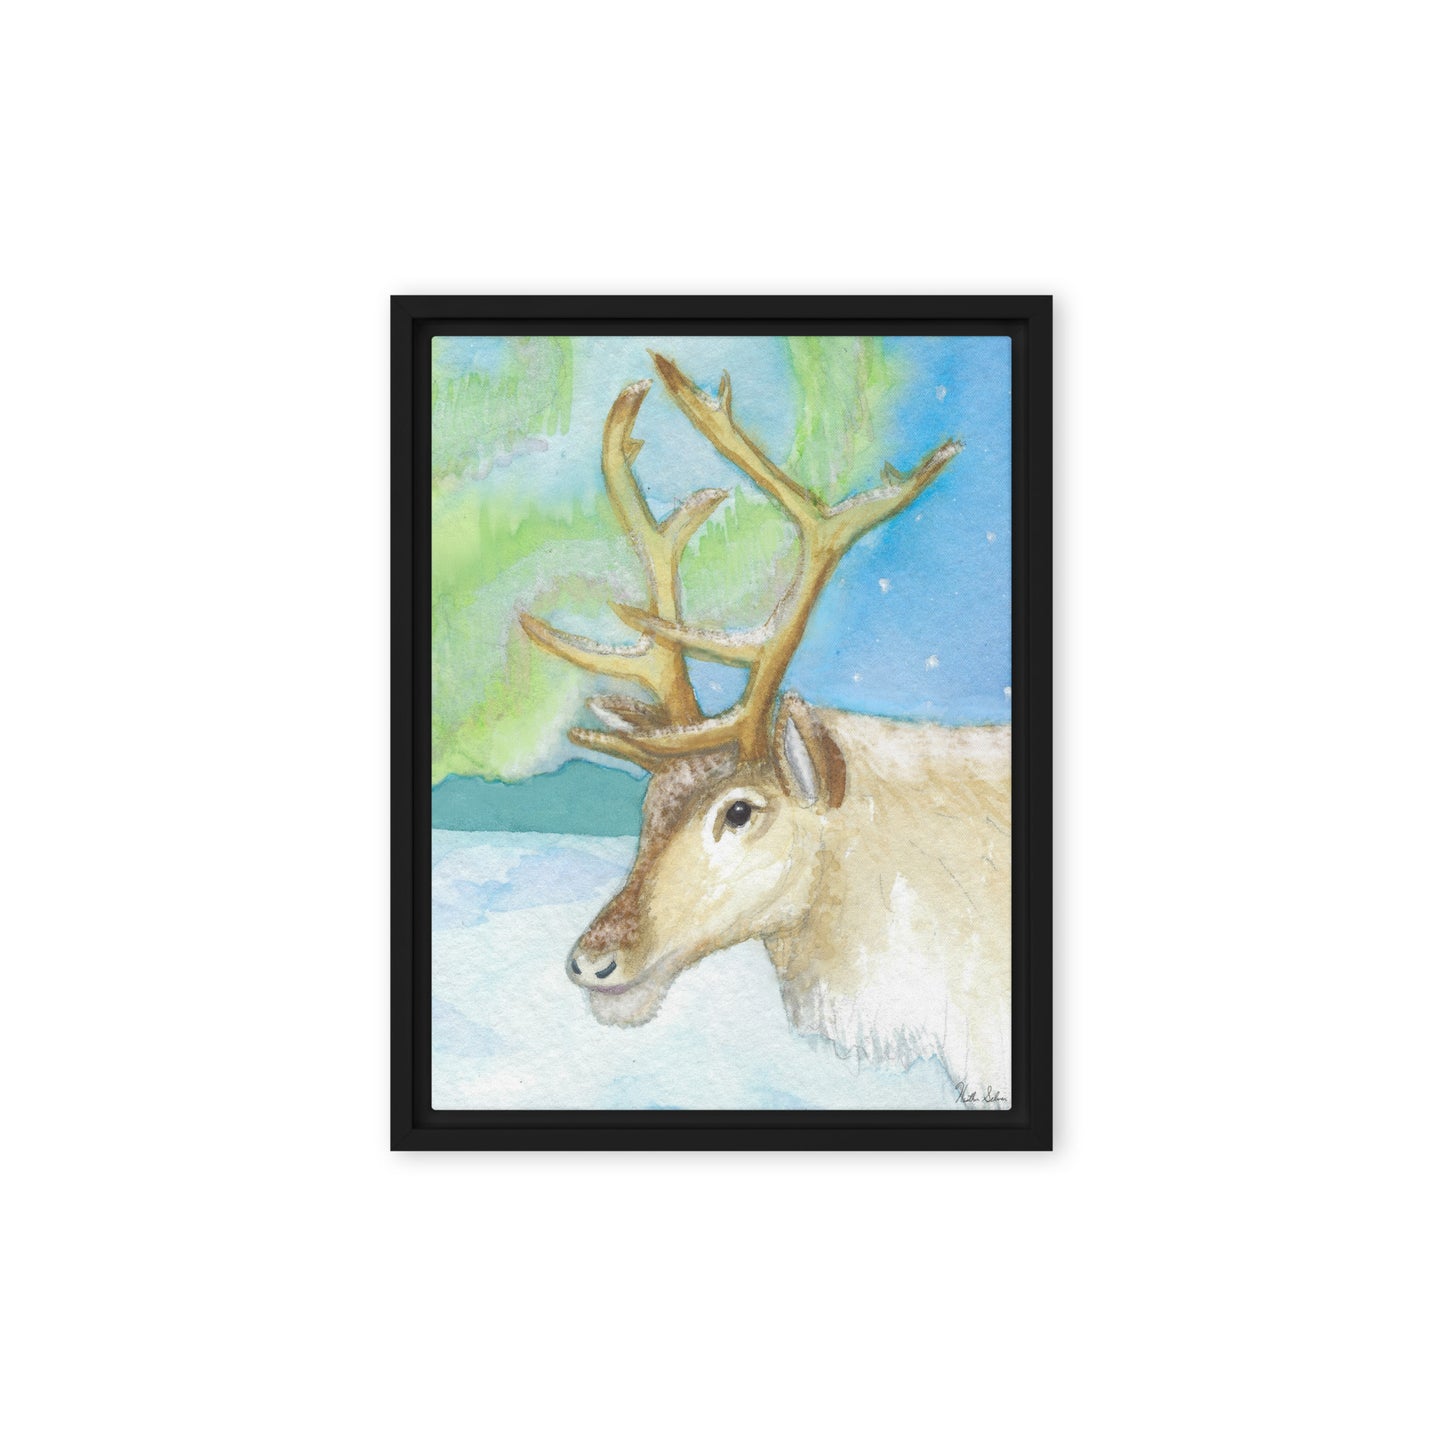 12 by 16 inch framed canvas art print of Heather Silver's Northern Lights Reindeer.  Canvas print mounted in a black pine frame. Hanging hardware included.